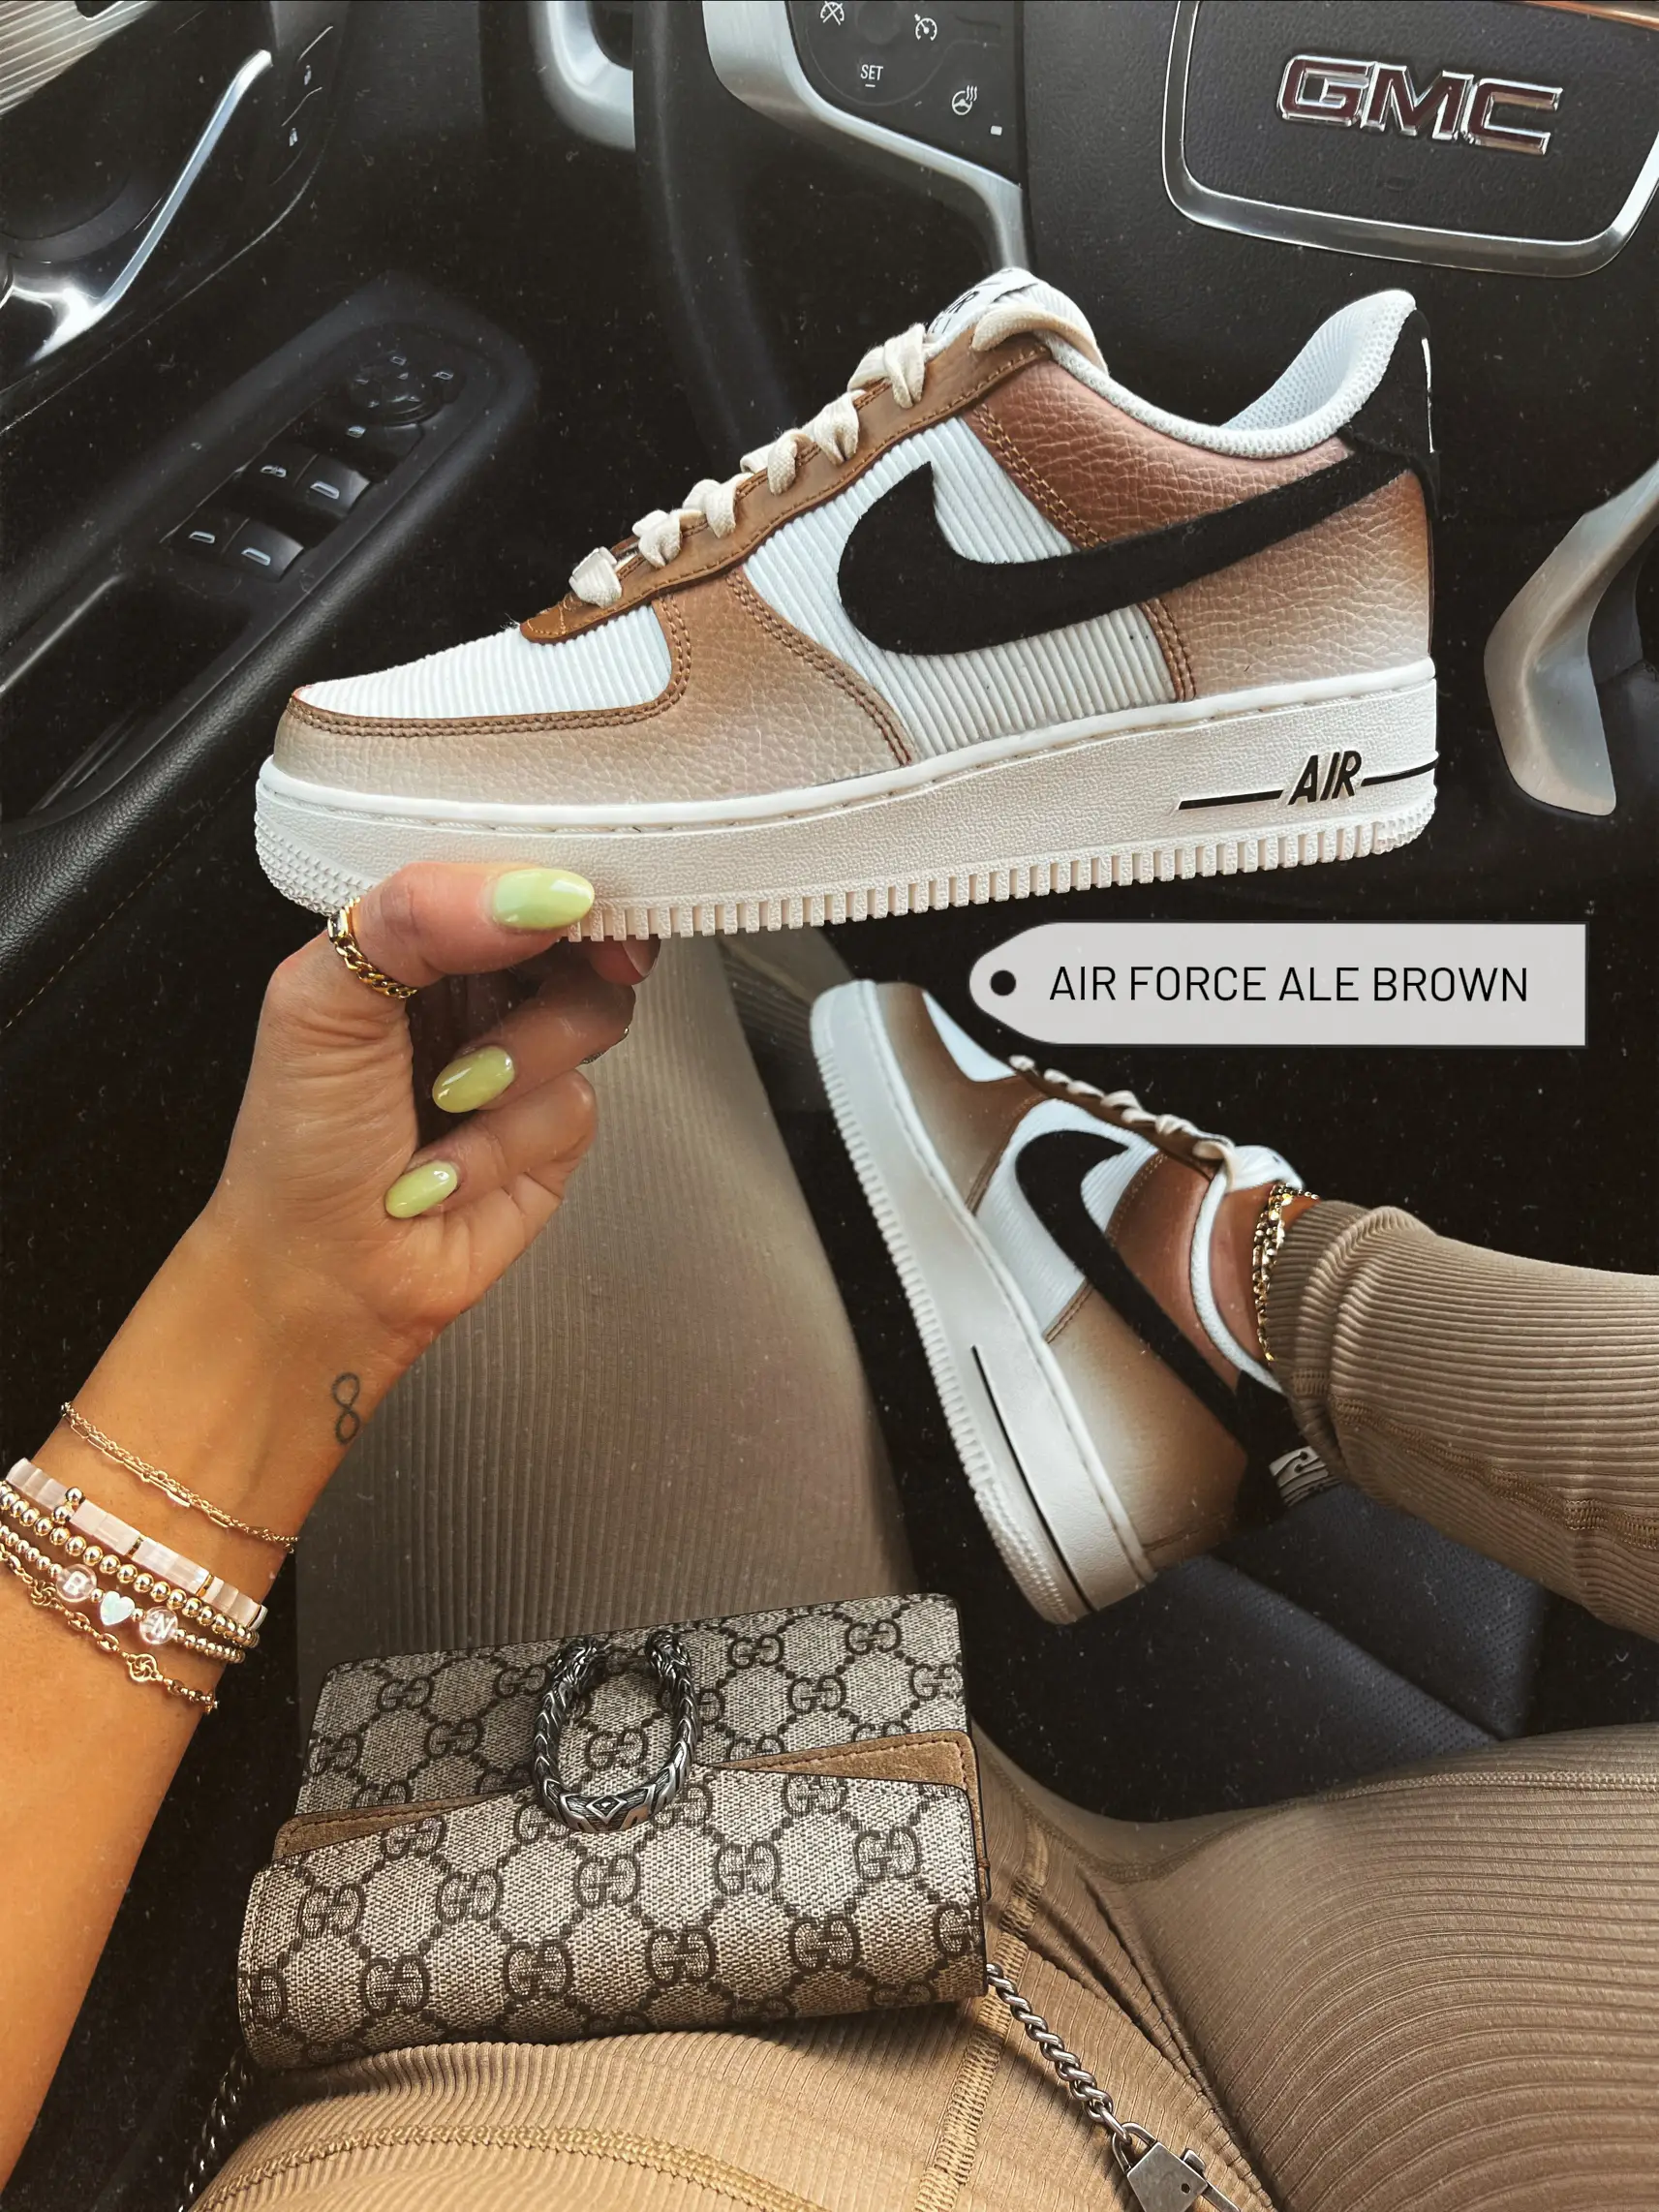 louis vuitton air force ones from dh gate｜TikTok Search